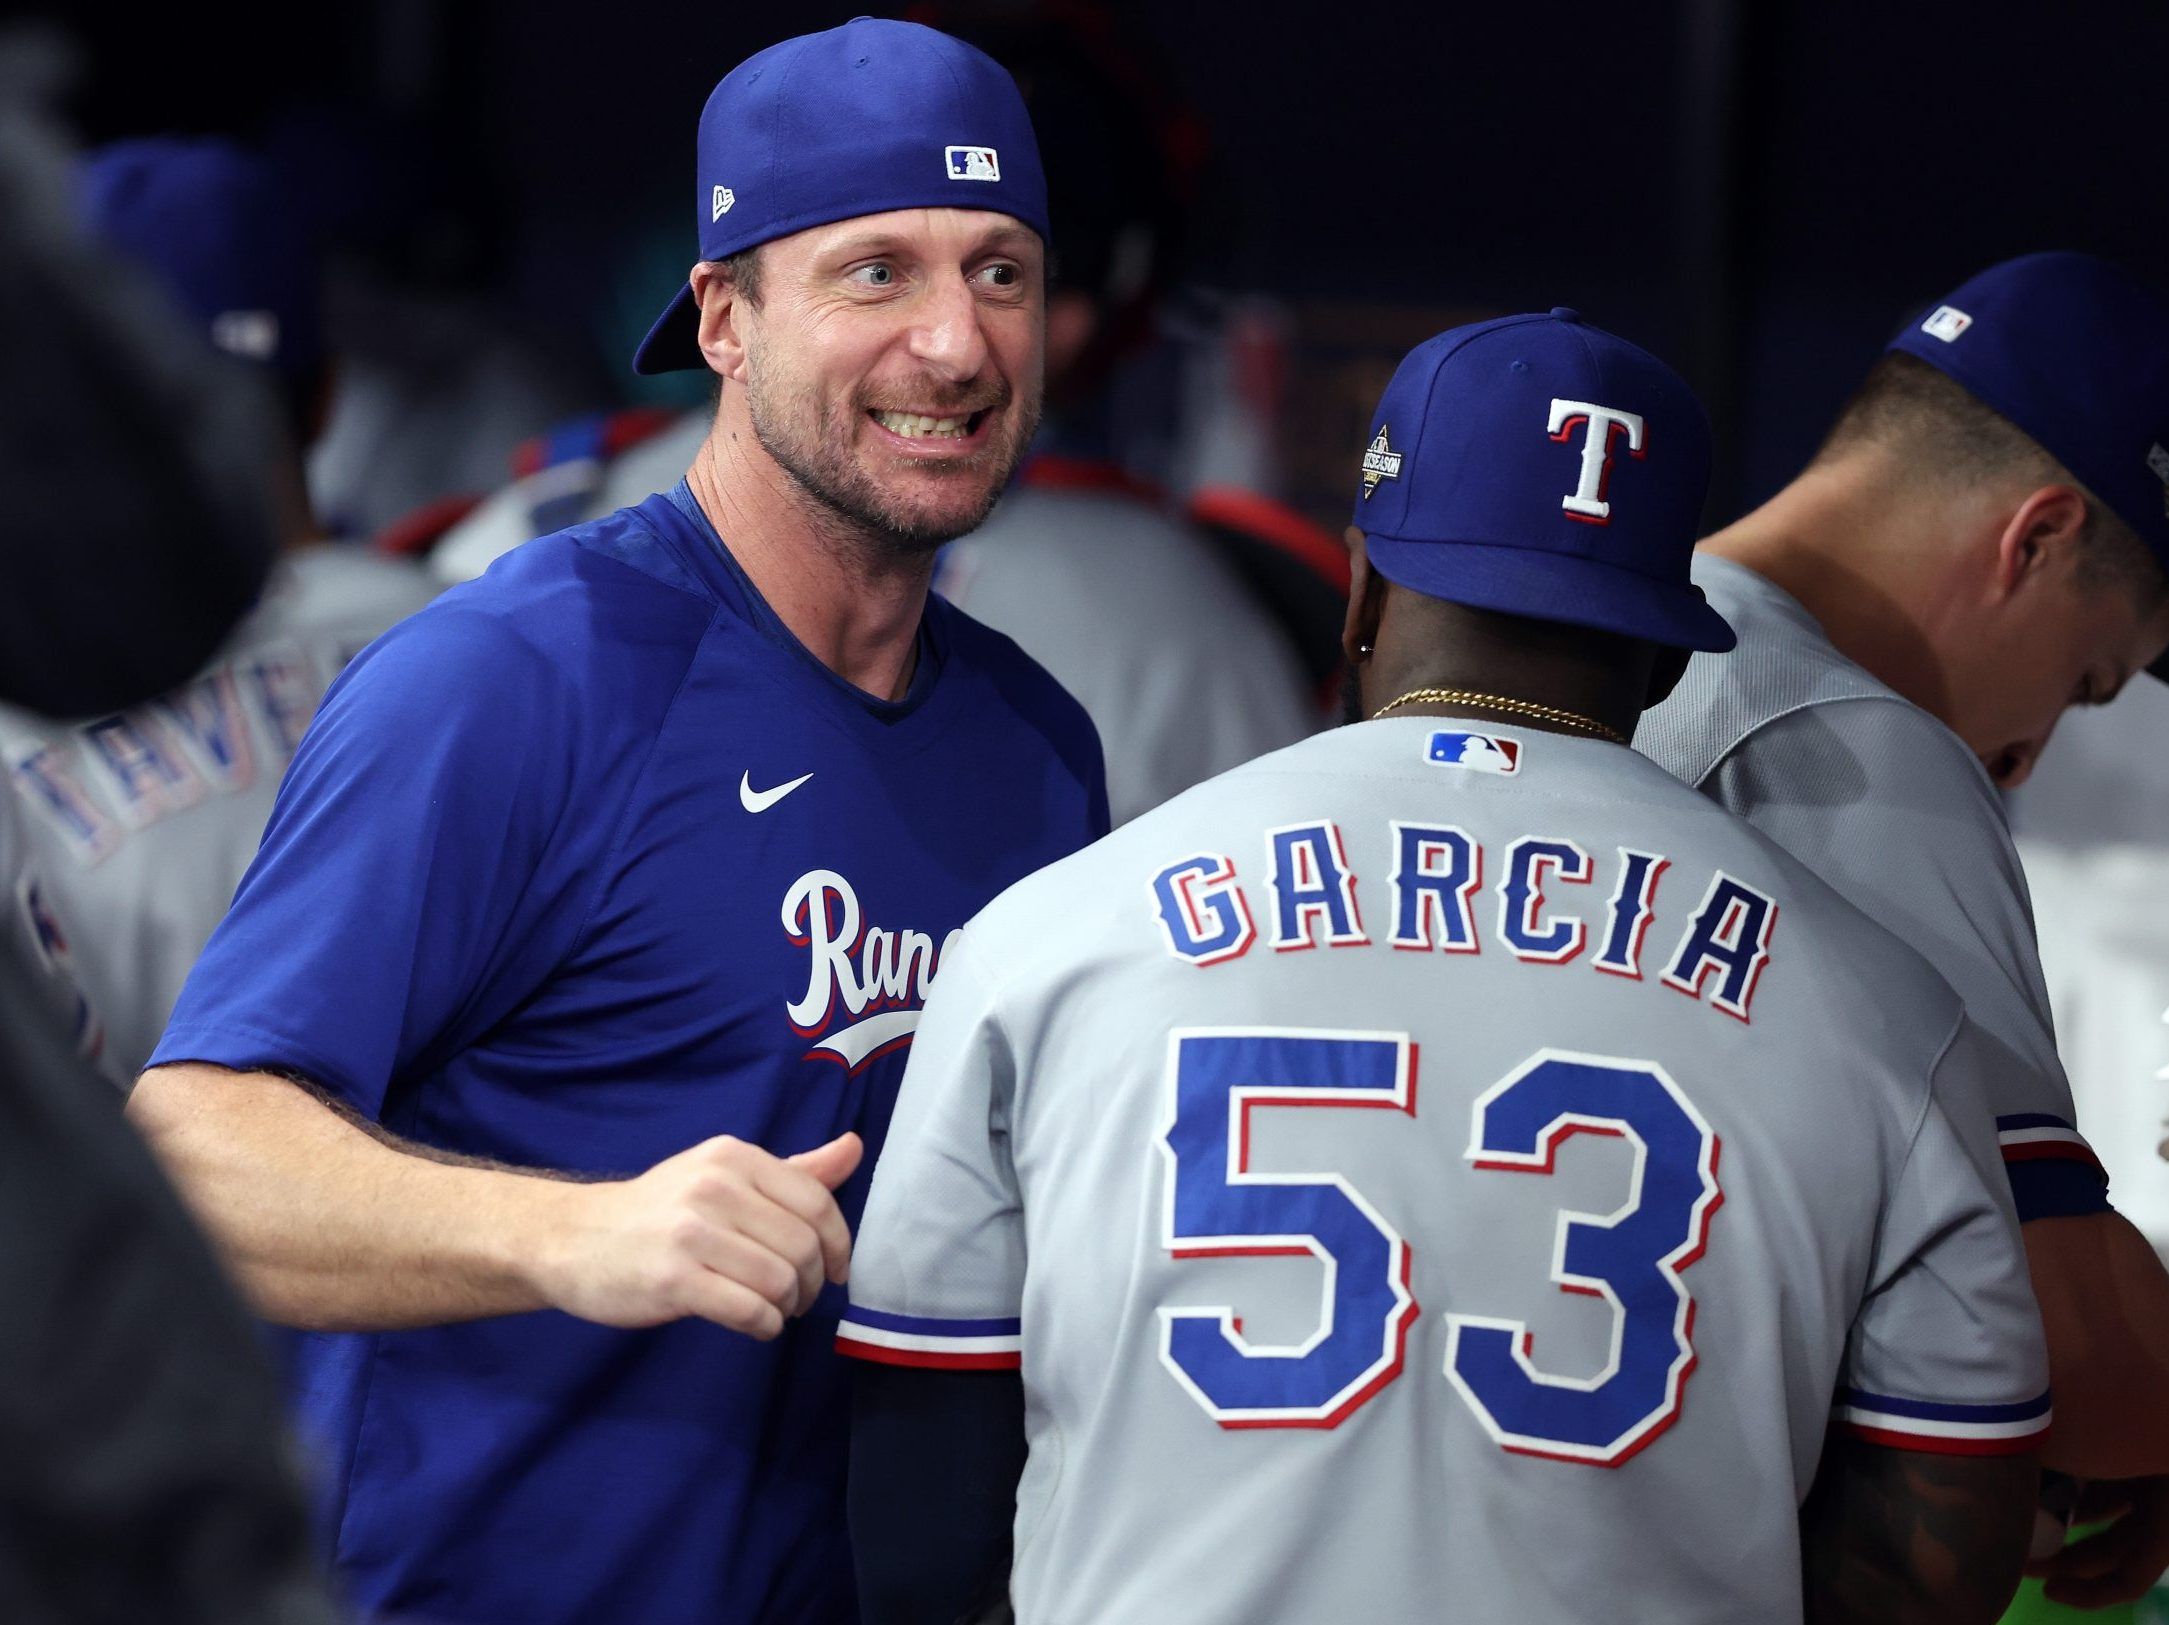 Max Scherzer to start Game 3 of ALCS for Texas Rangers against Astros